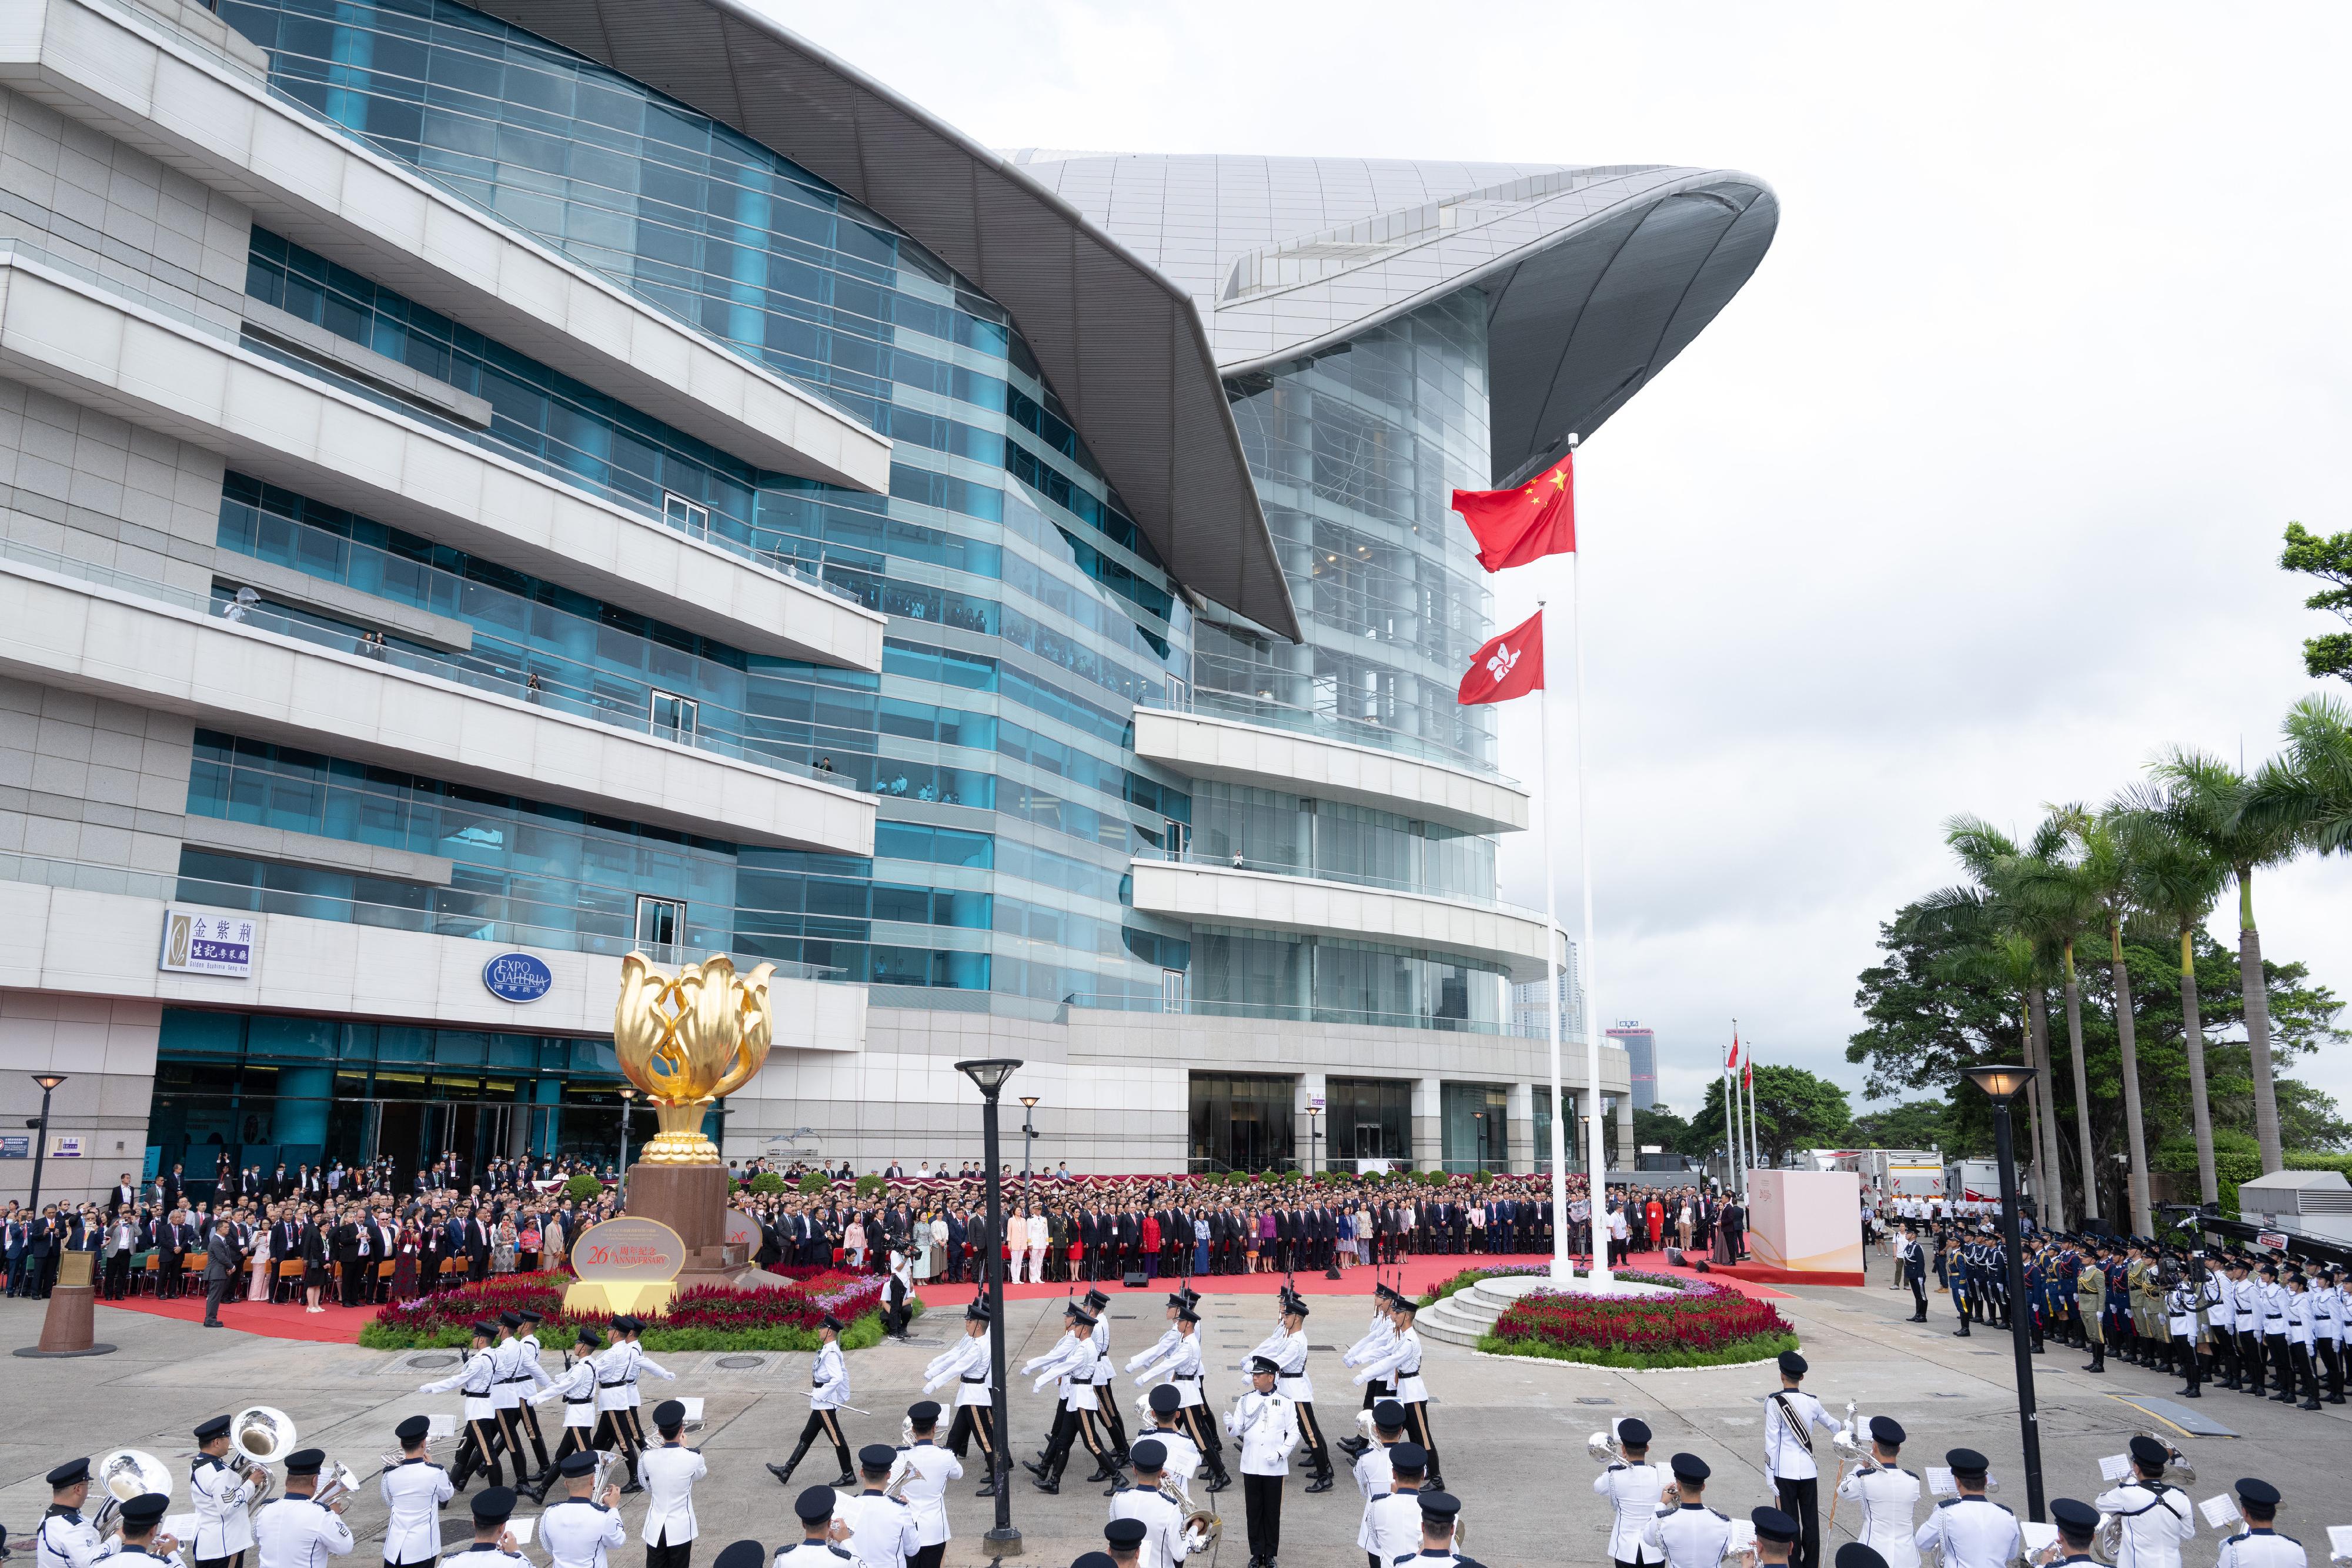 The Chief Executive, Mr John Lee, together with Principal Officials and guests, attends the flag-raising ceremony for the 26th anniversary of the establishment of the Hong Kong Special Administrative Region at Golden Bauhinia Square in Wan Chai this morning (July 1).